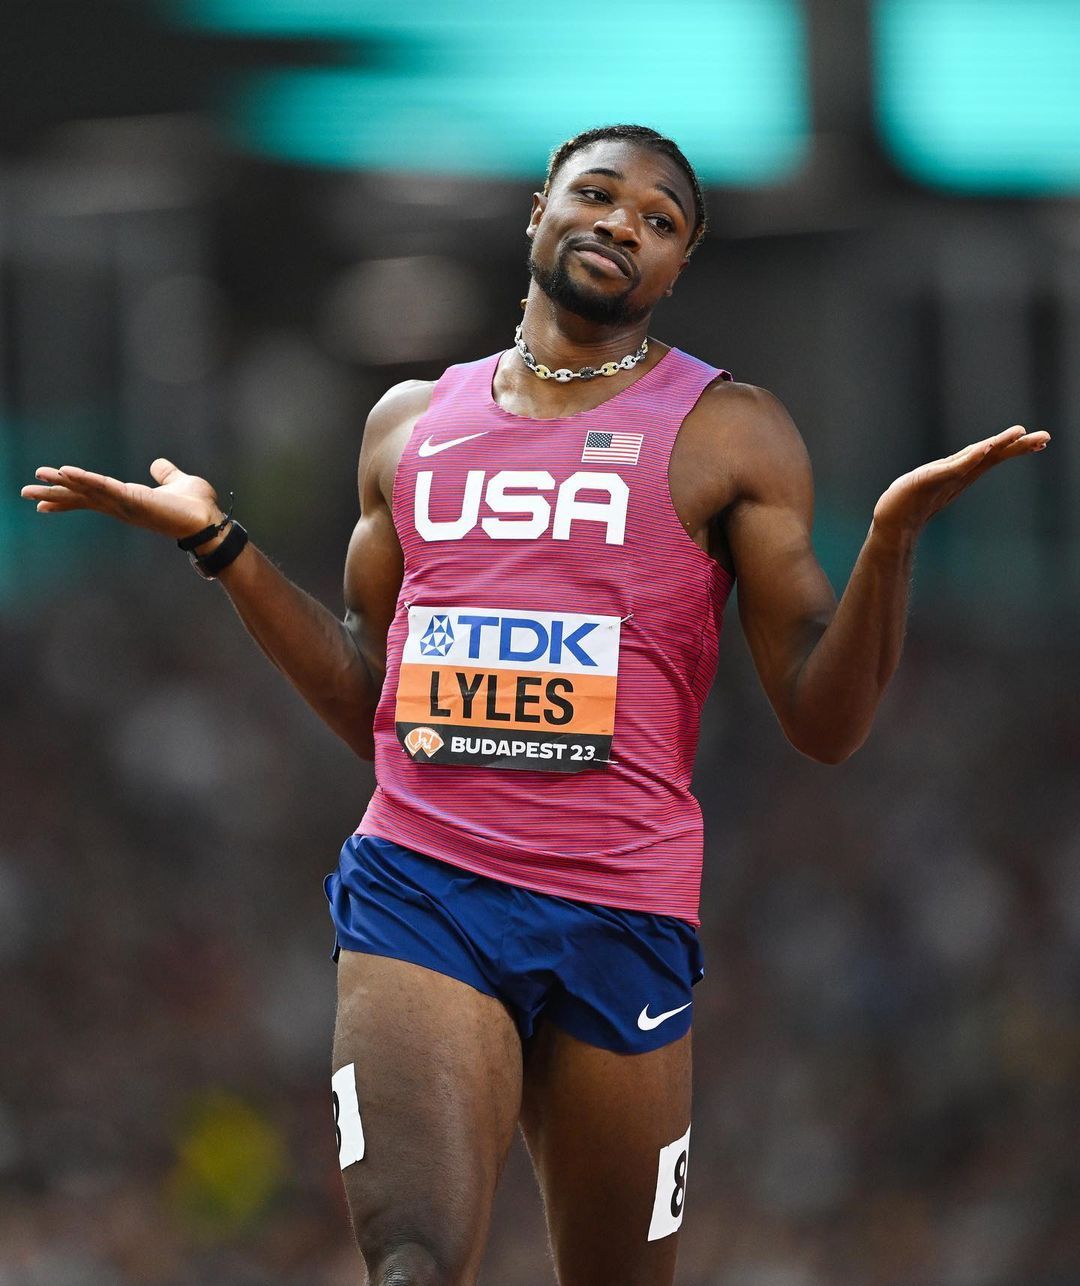 World Athletics Rankings - Ready for Zurich Diamond League --- Noah Lyles in the men's semi-finals at the Budapest 23 World Athletics Championships